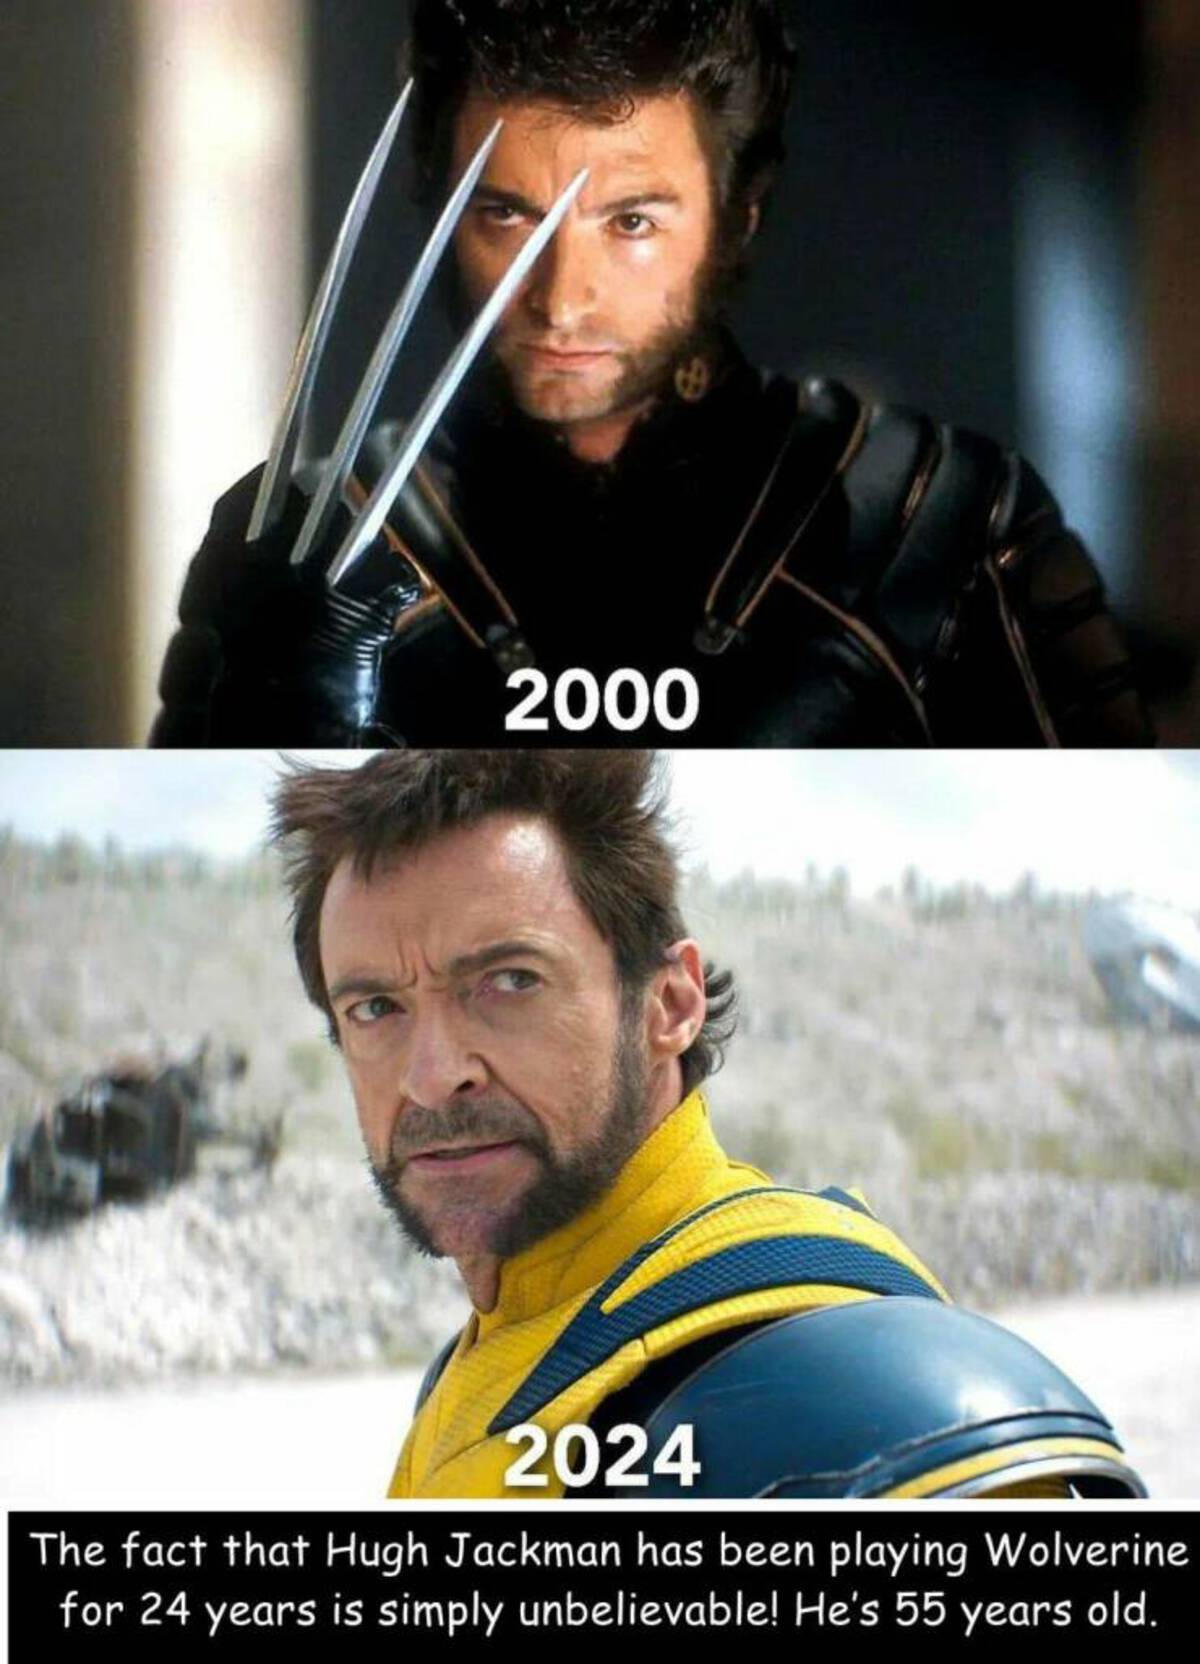 hugh jackman wolverine - 2000 2024 The fact that Hugh Jackman has been playing Wolverine for 24 years is simply unbelievable! He's 55 years old.